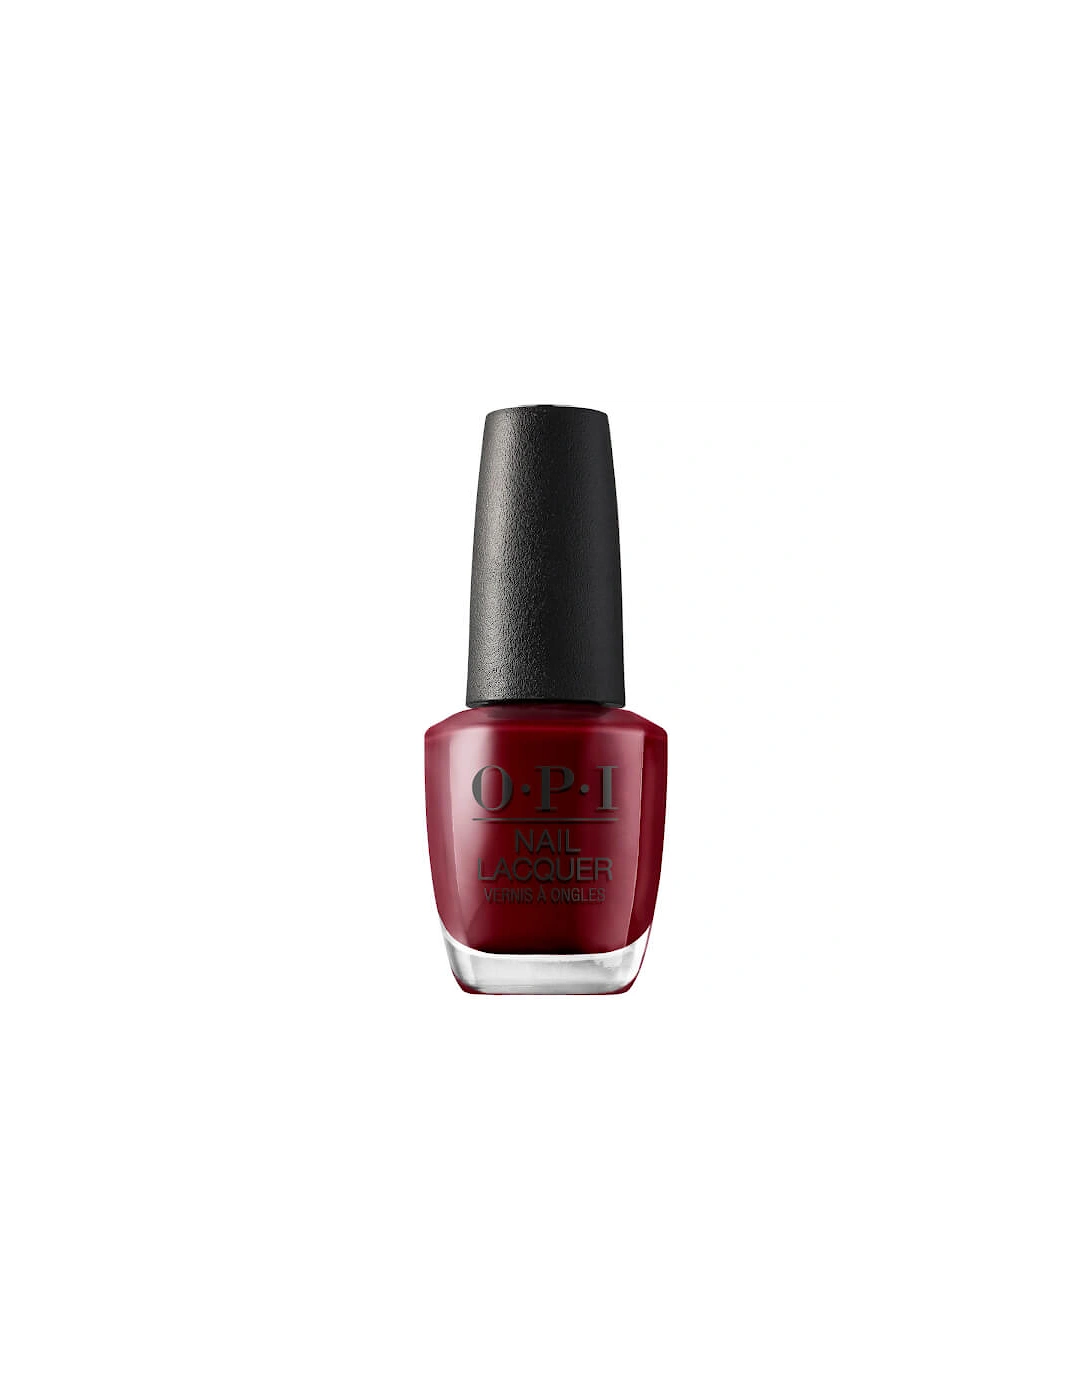 Nail Lacquer 15ml - We The Female, 2 of 1